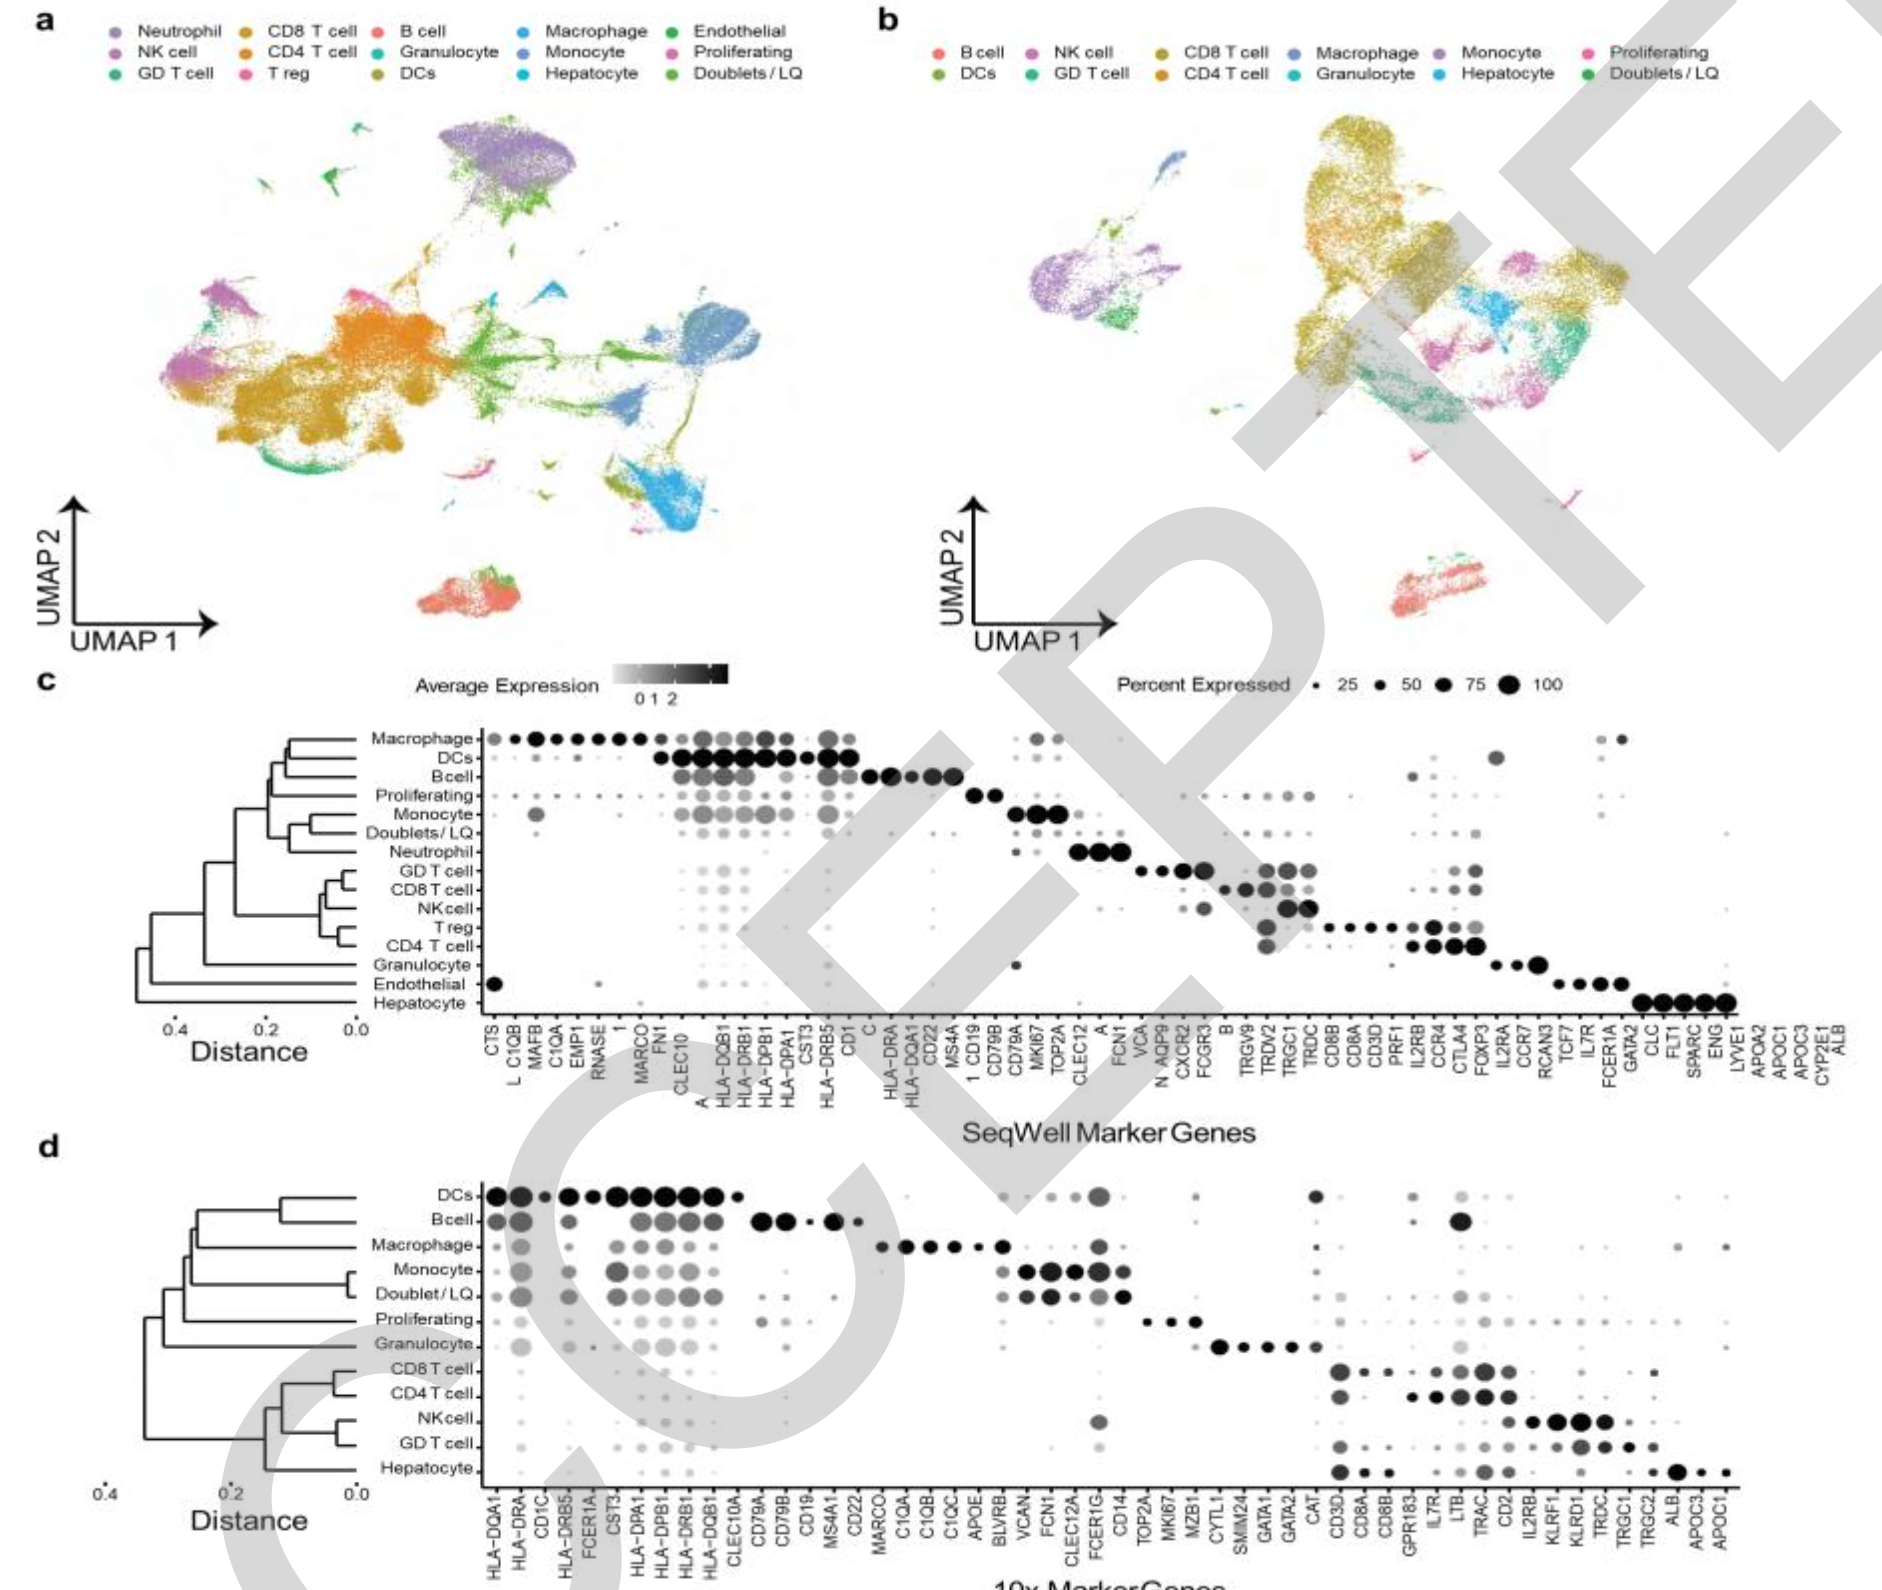 Single-cell RNA sequencing of liver fine-needle aspirates captures immune diversity in the blood and liver in chronic hepatitis B patients